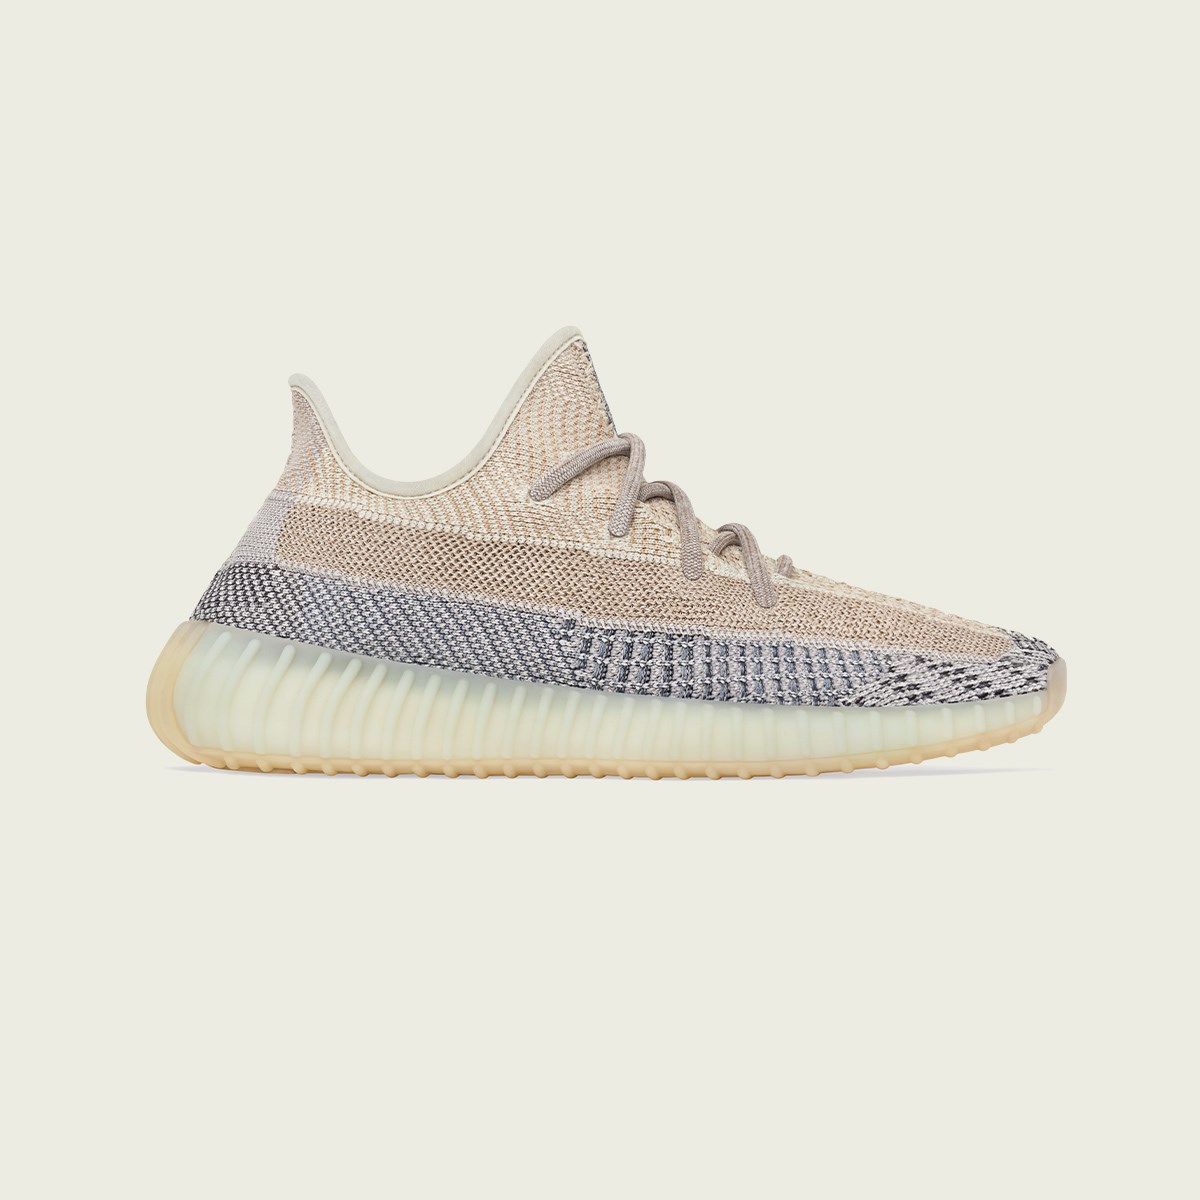 Yeezy Boost 350 V2 GY7658 01